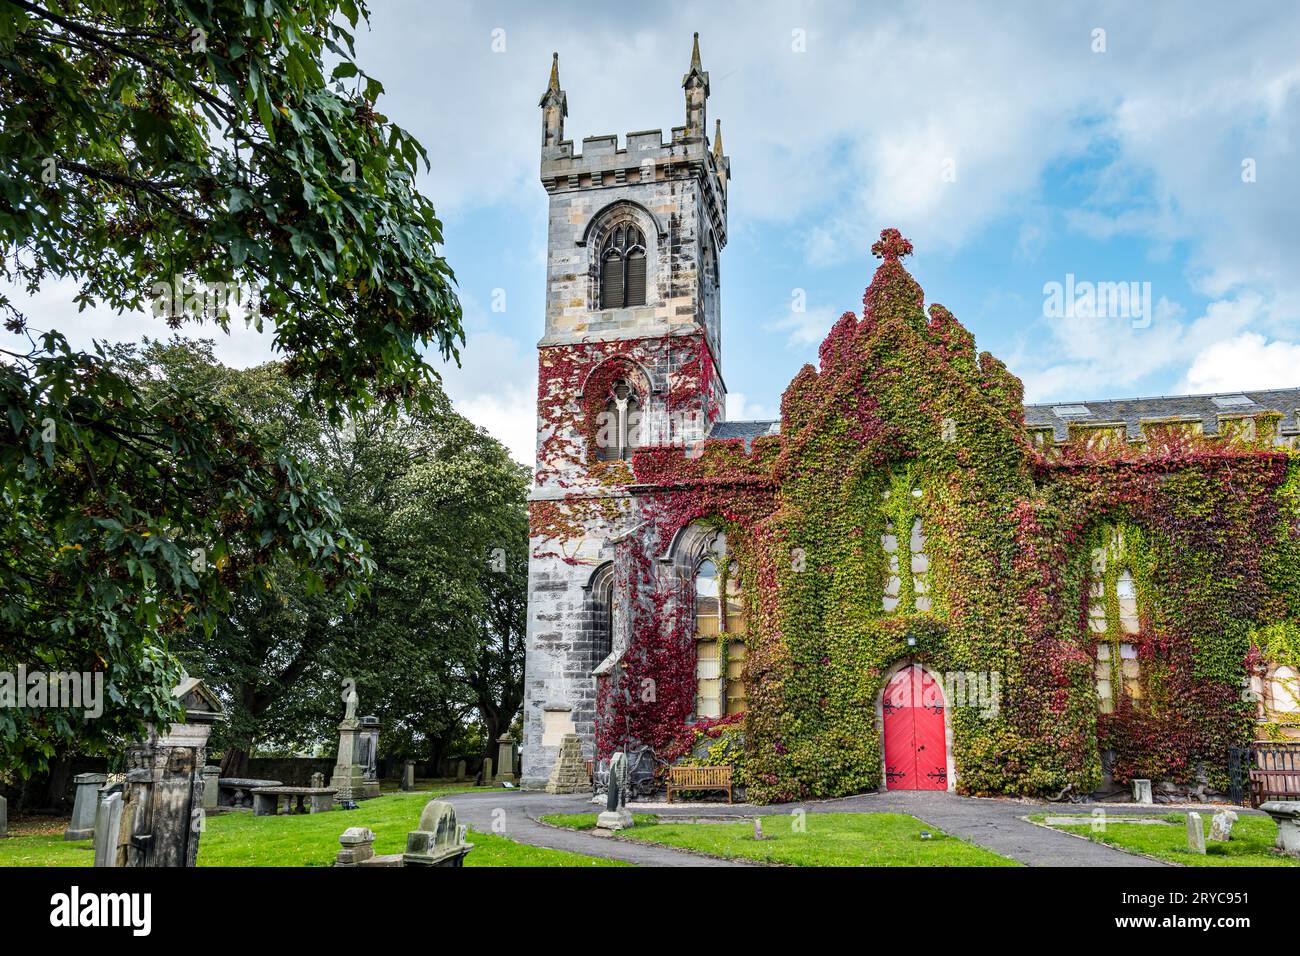 Autumn red ivy growing on wall of Liberton Kirk or Church with red door and graveyard, Edinburgh, Scotland, UK Stock Photo